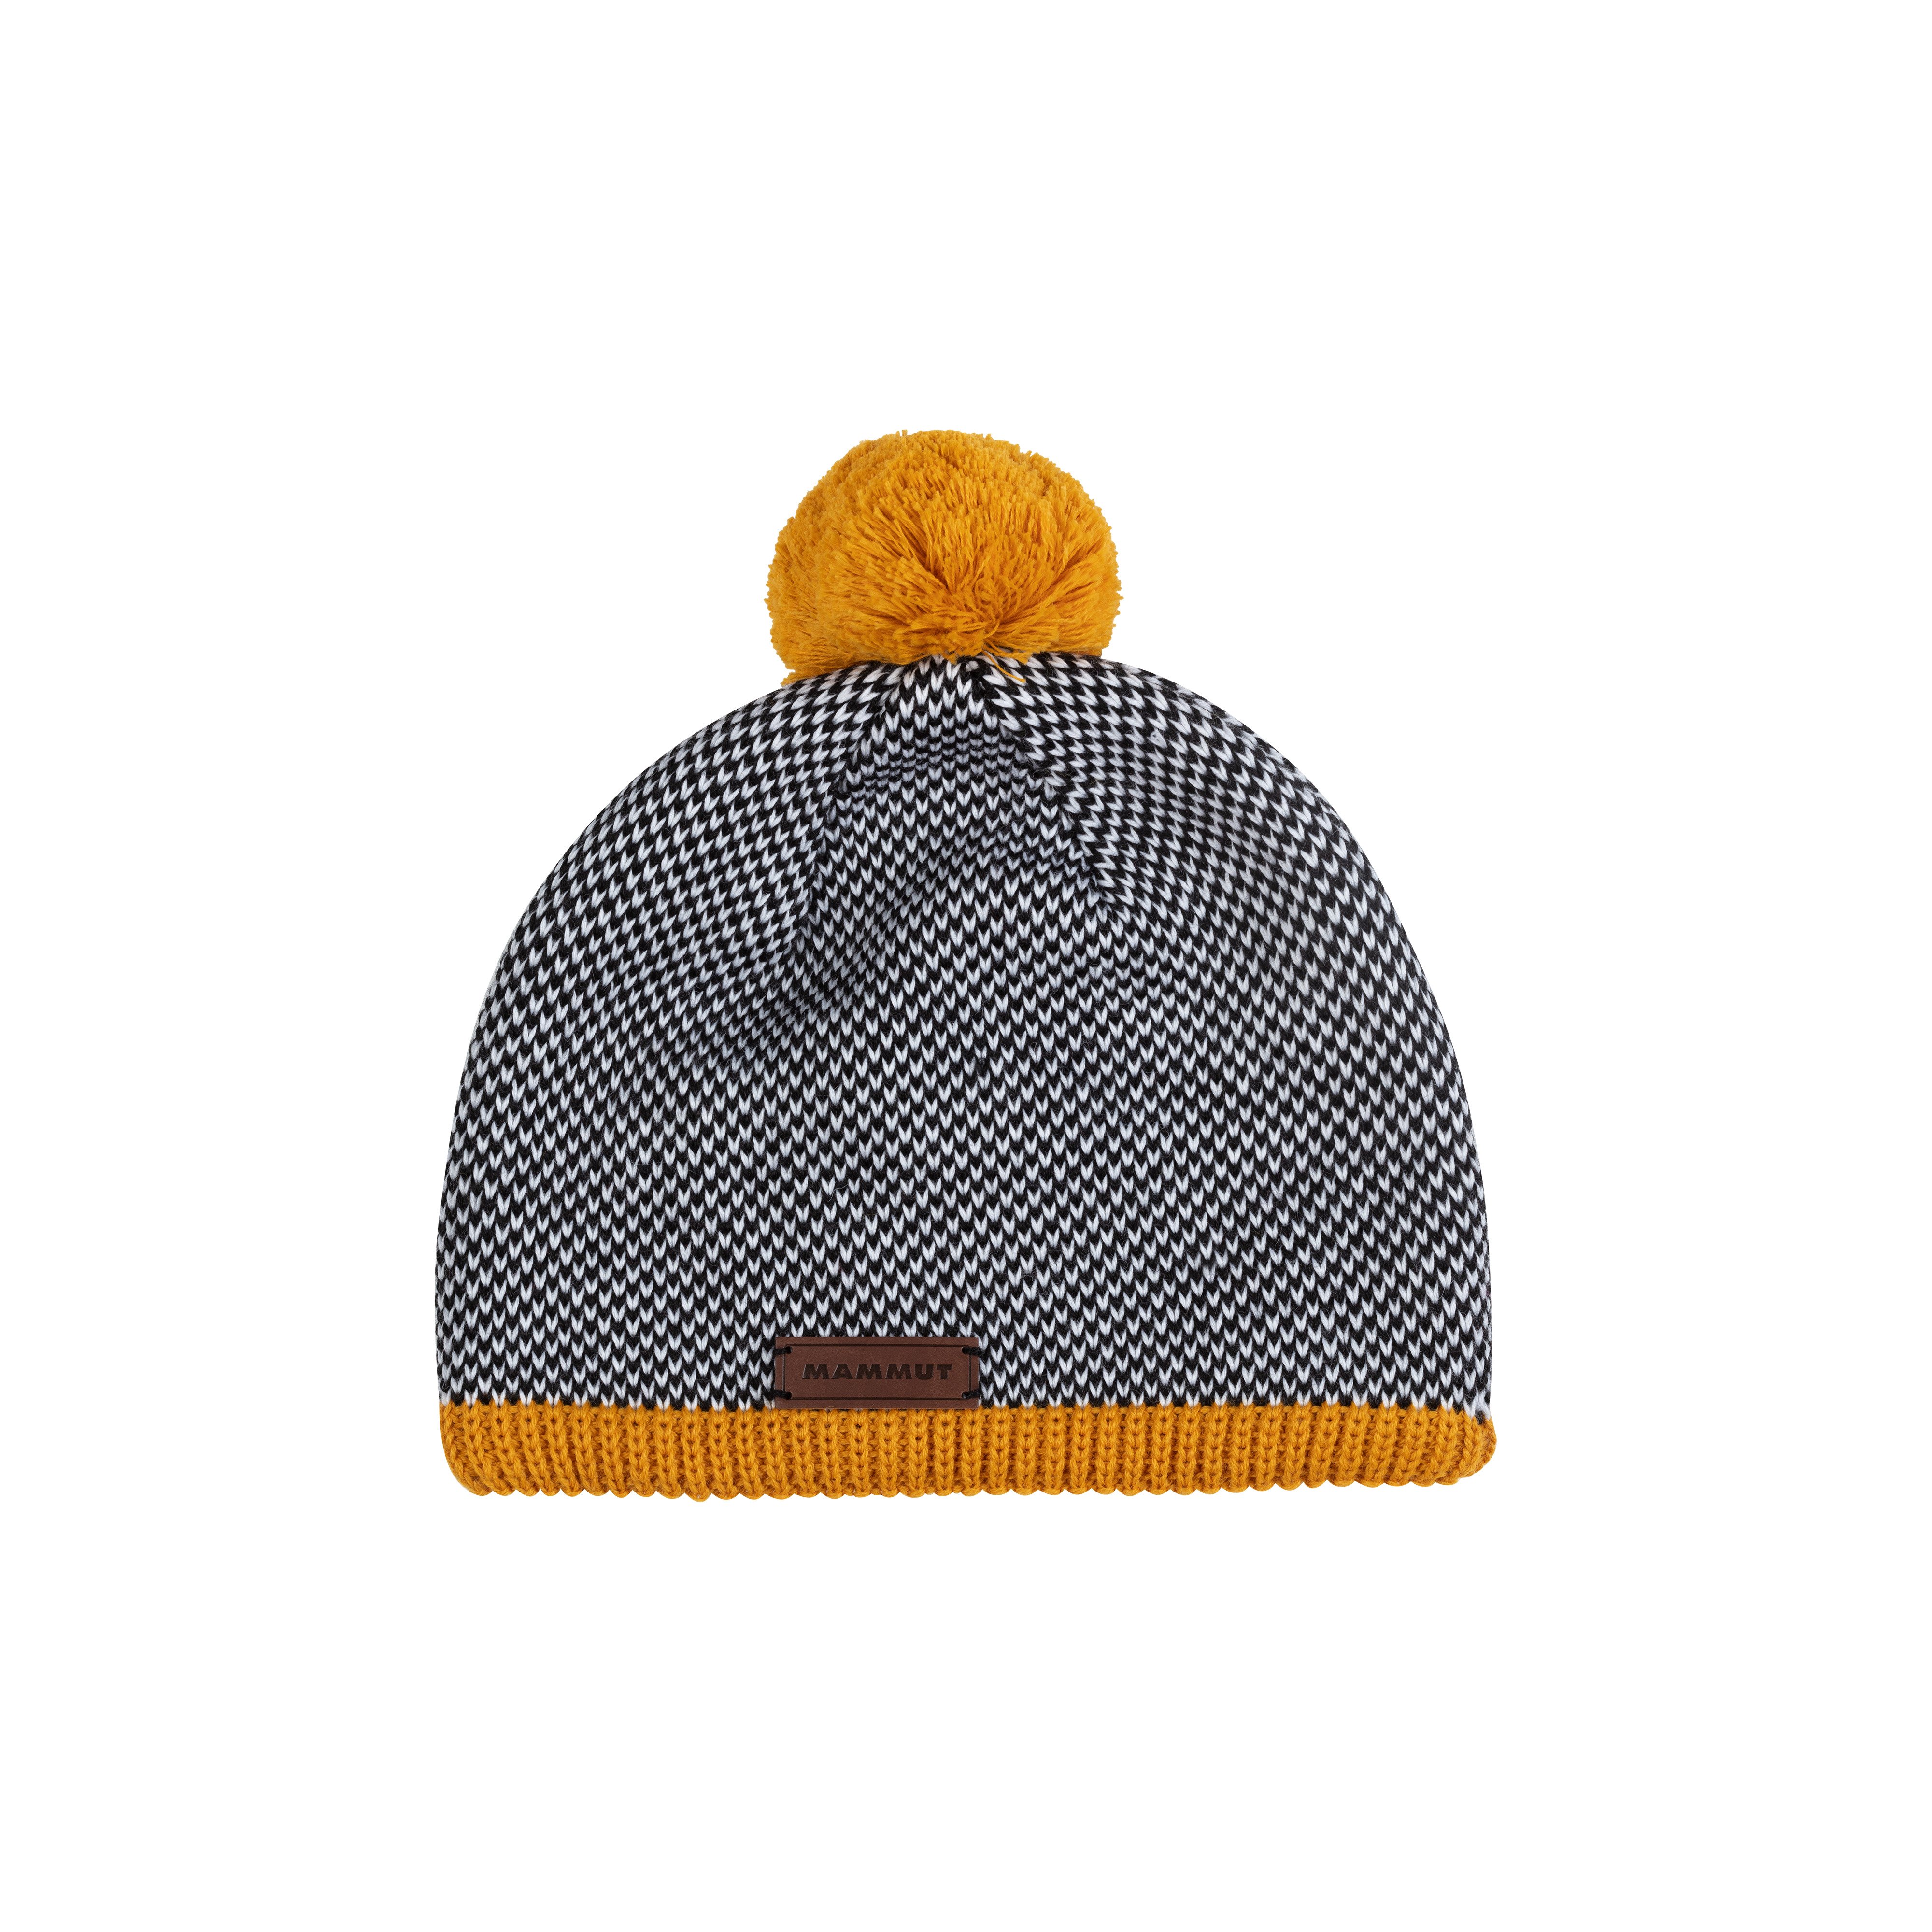 Snow Beanie - golden-black, one size product image